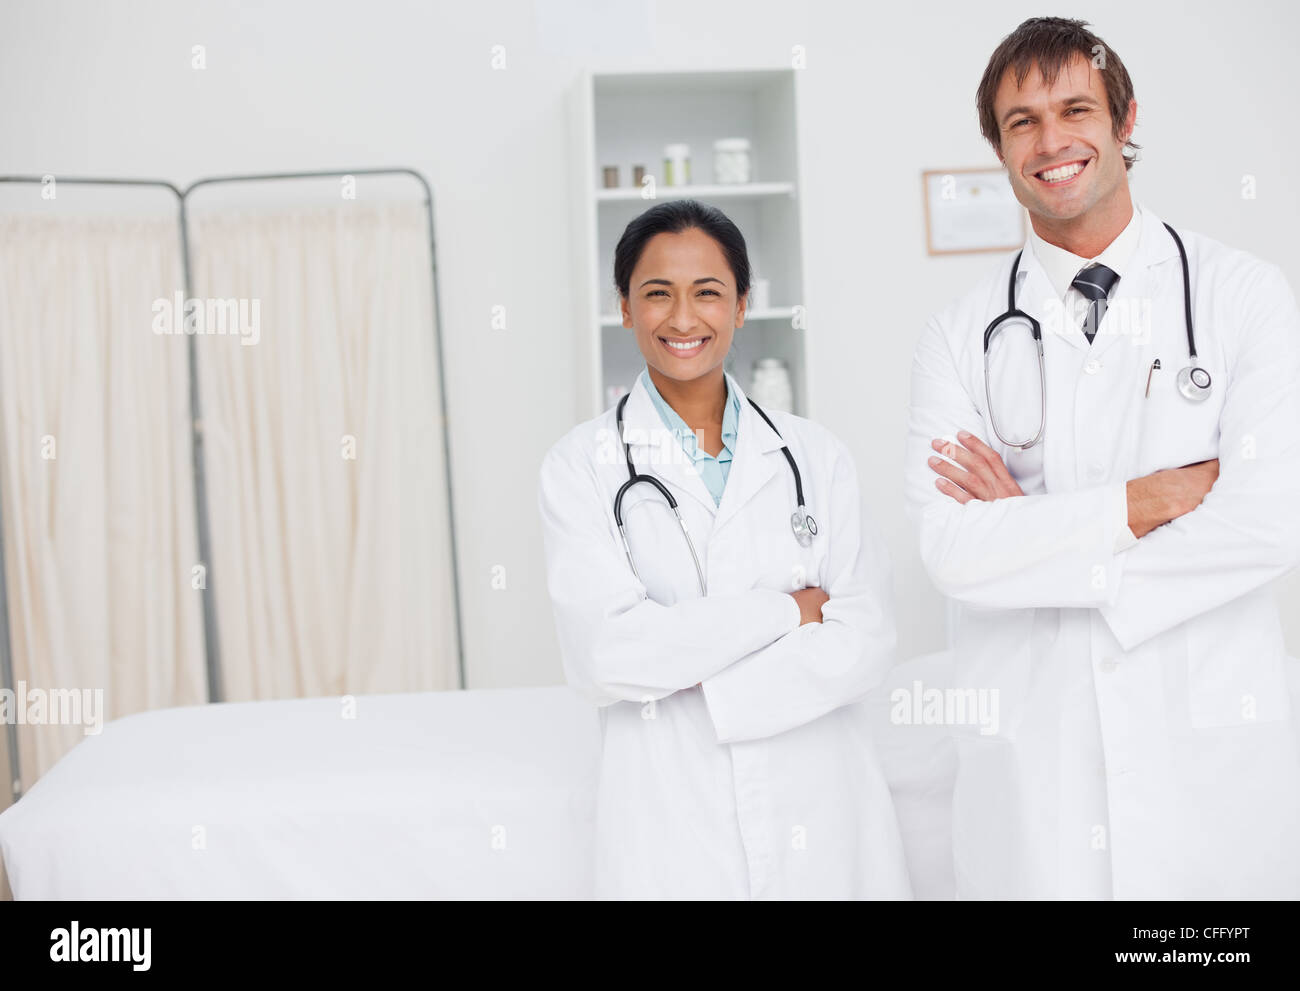 Young happy surgeons standing in a hospital room while crossing their arms Stock Photo